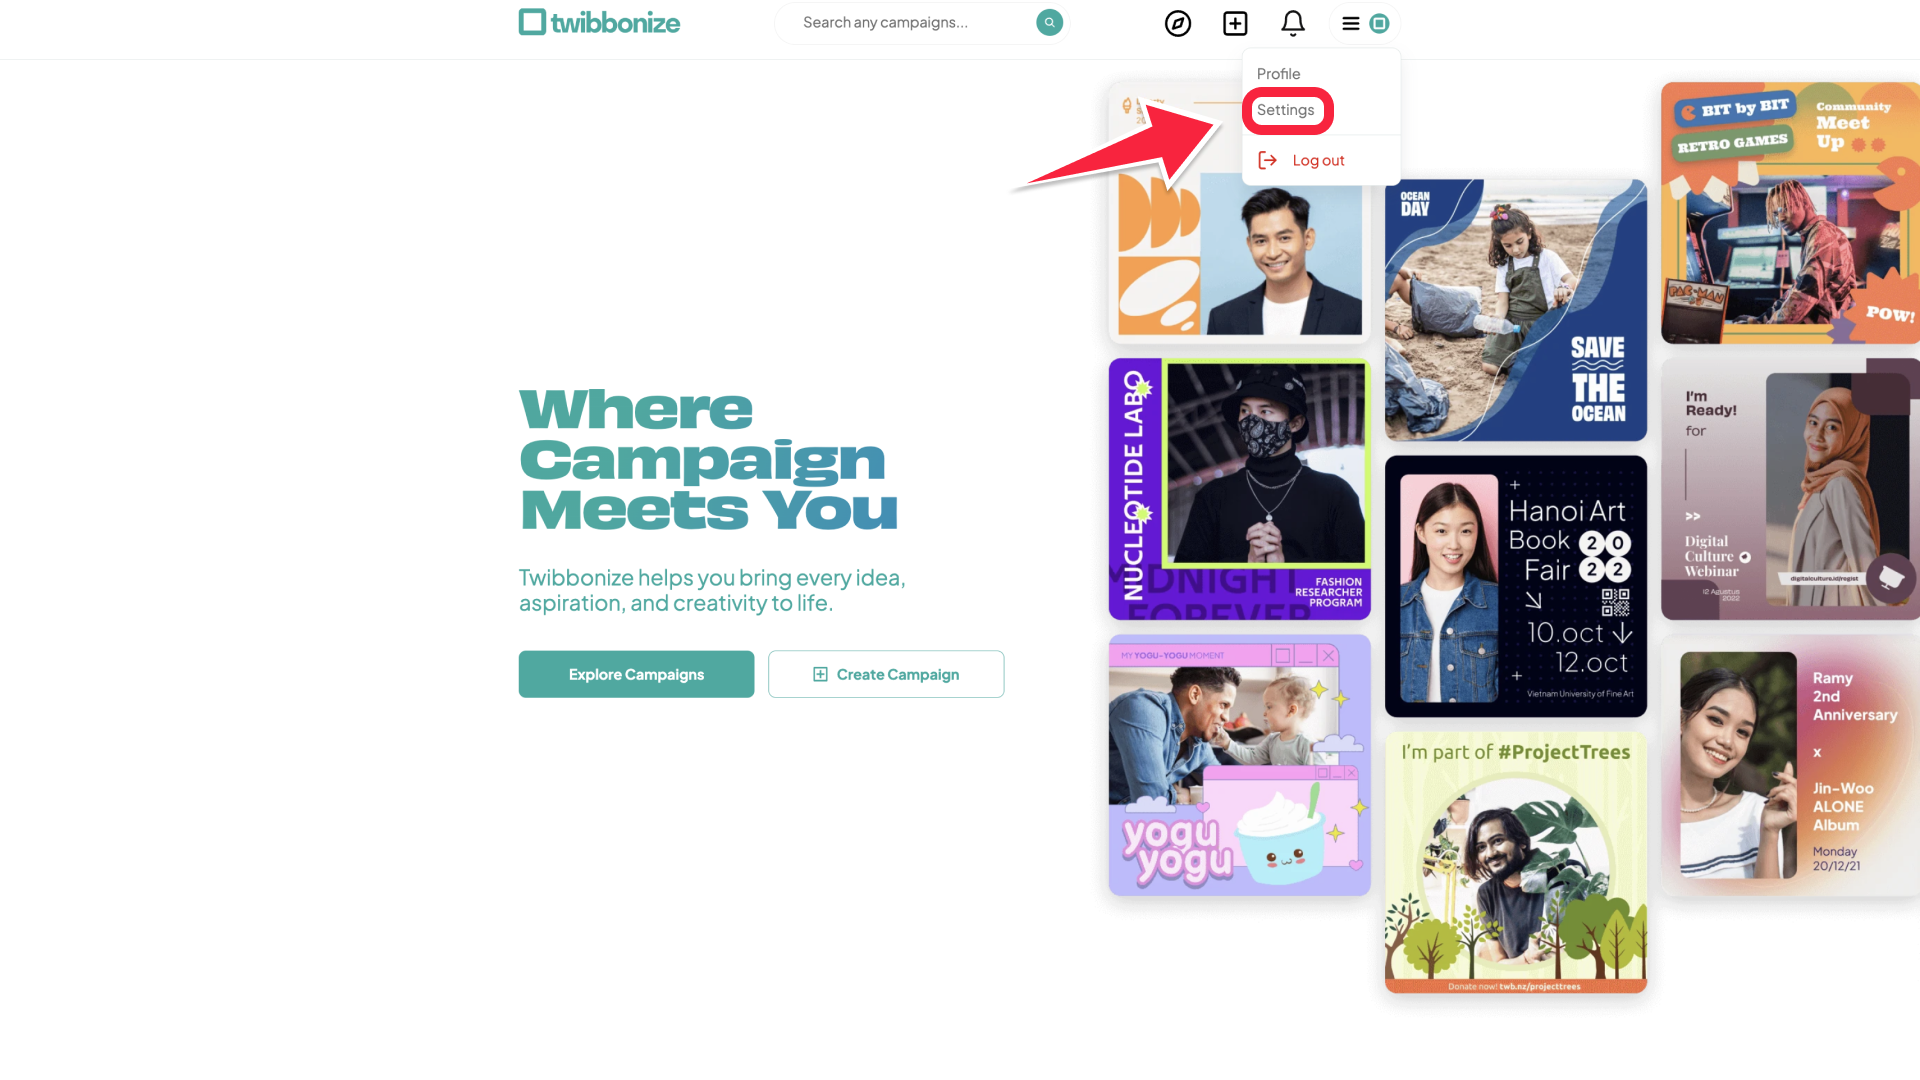 4.EN 1. How to Change the Campaign Creator's Name, Username, Bio, Website_.png